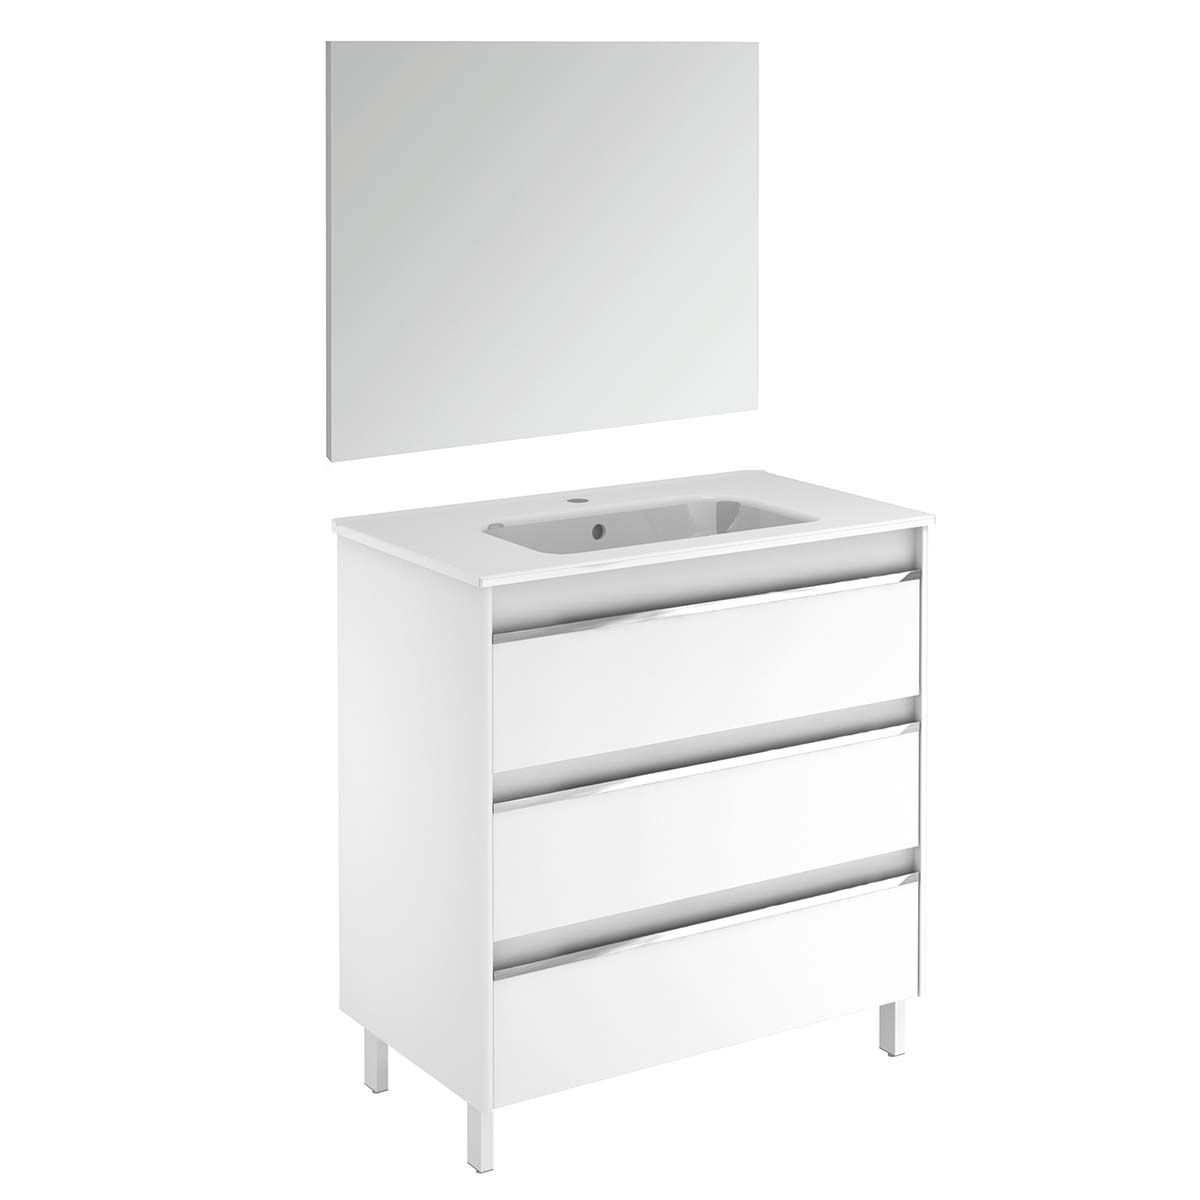 Deciding Between a Drawer Unit Under Your Sink or a Drawered Bathroom Vanity